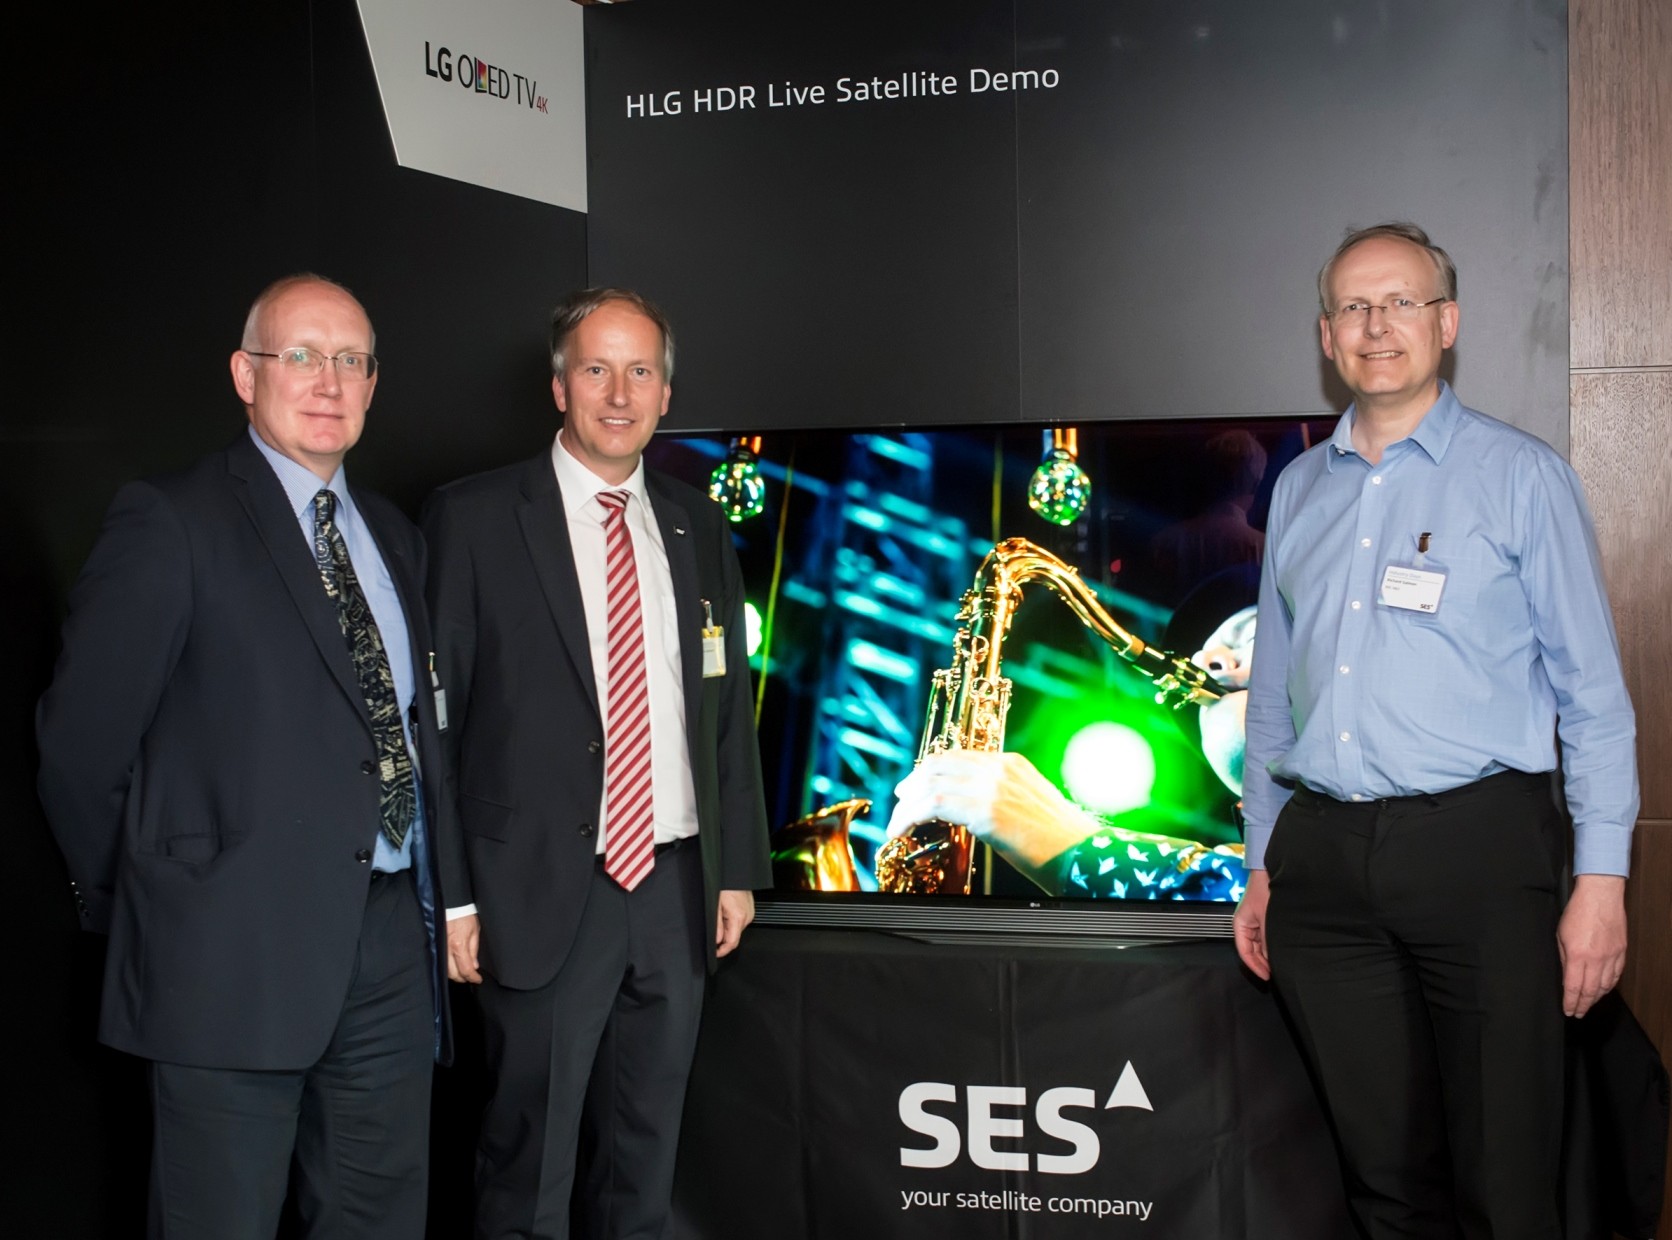 Officials of LG, BBC and SES pose in front of an LG OLED TV at the ninth SES Industry Days conference in Luxembourg.